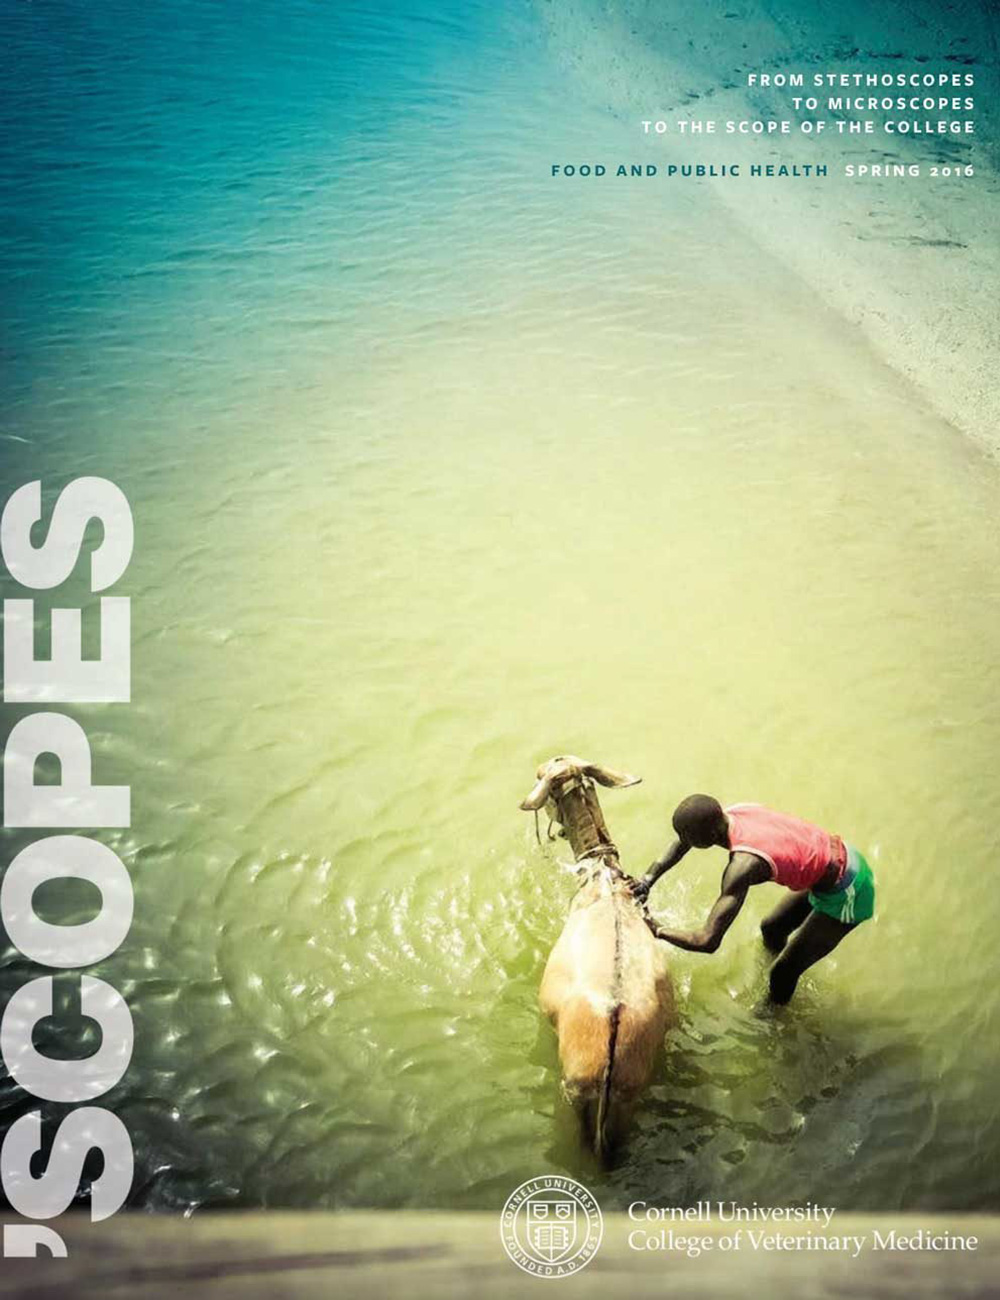 Image of the spring 2016 cover of 'Scopes, featuring a man washing a donkey in a river